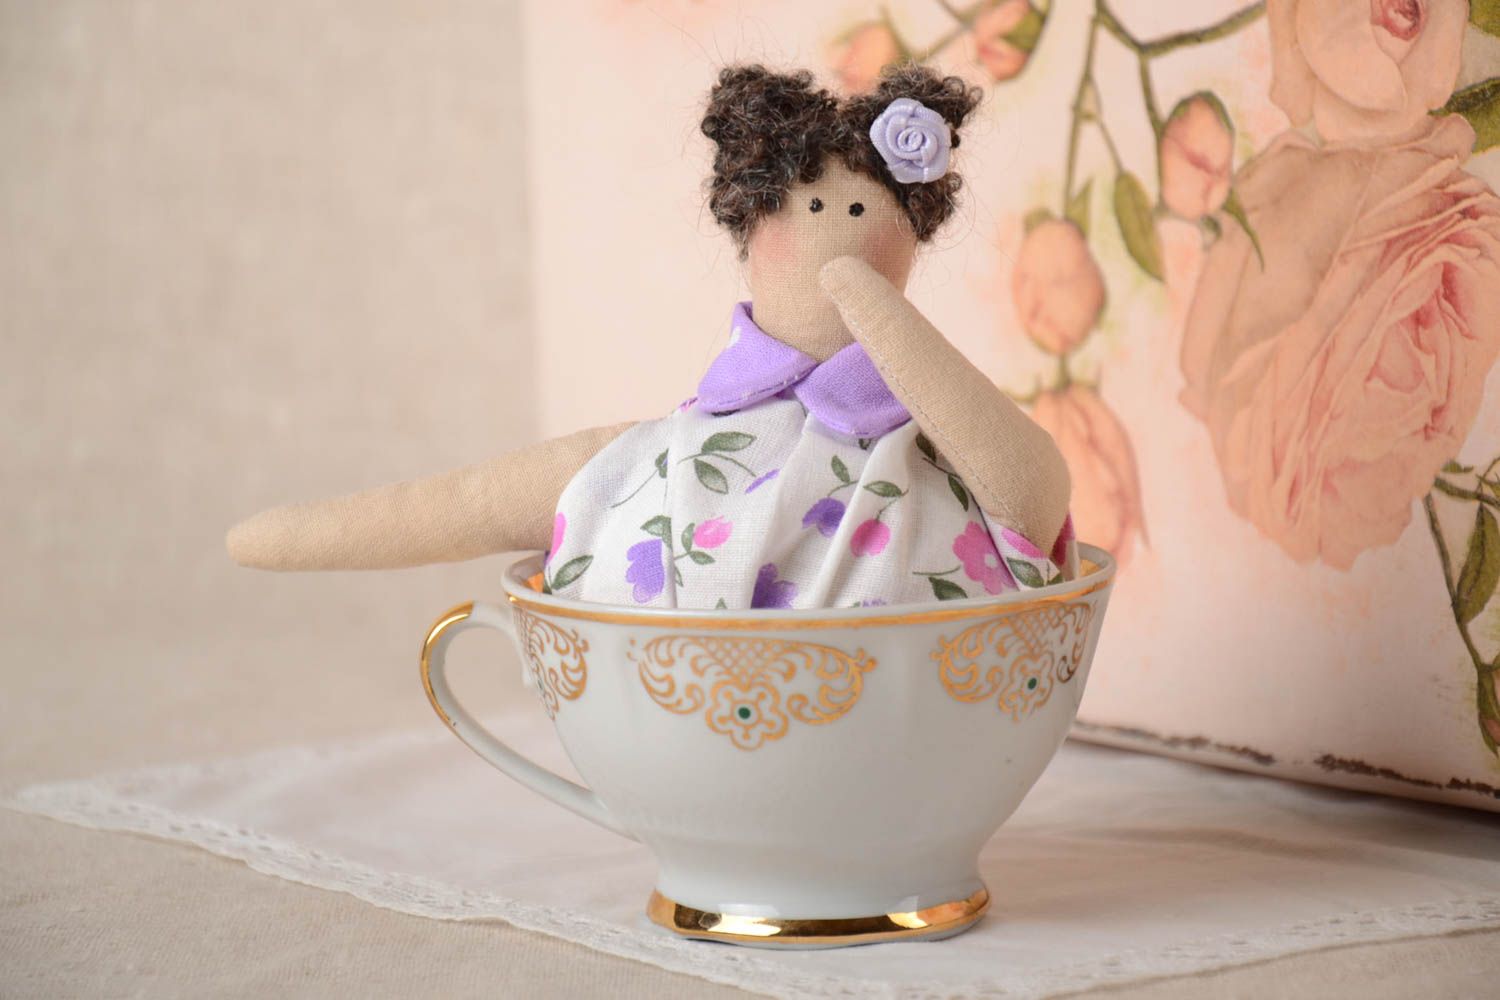 Small homemade soft toy handmade rag doll for cup decor kitchen design photo 1